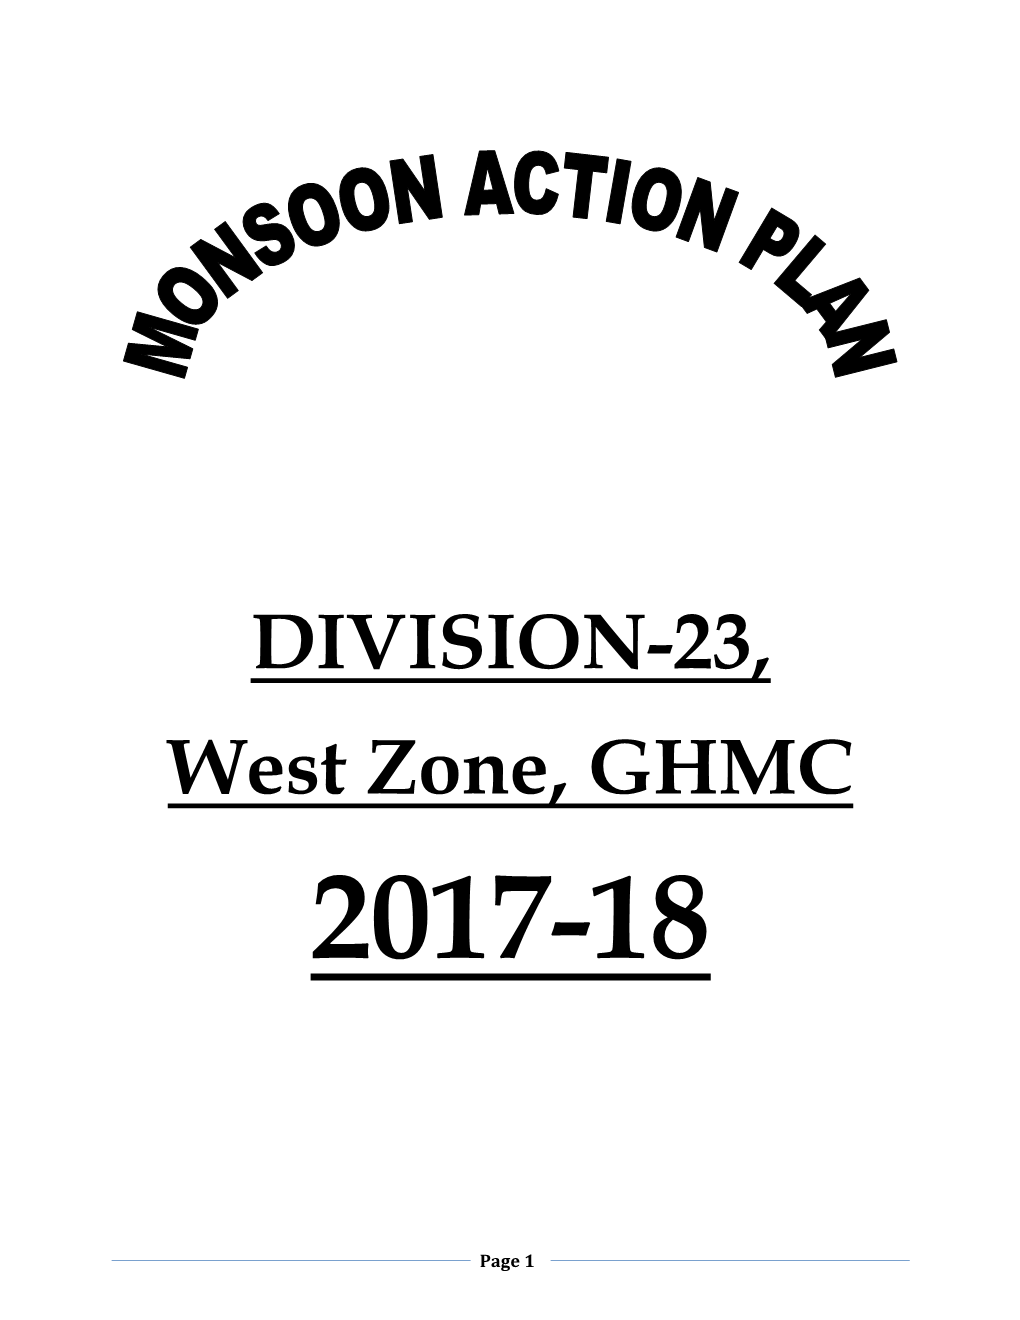 DIVISION-23, West Zone, GHMC 2017-18